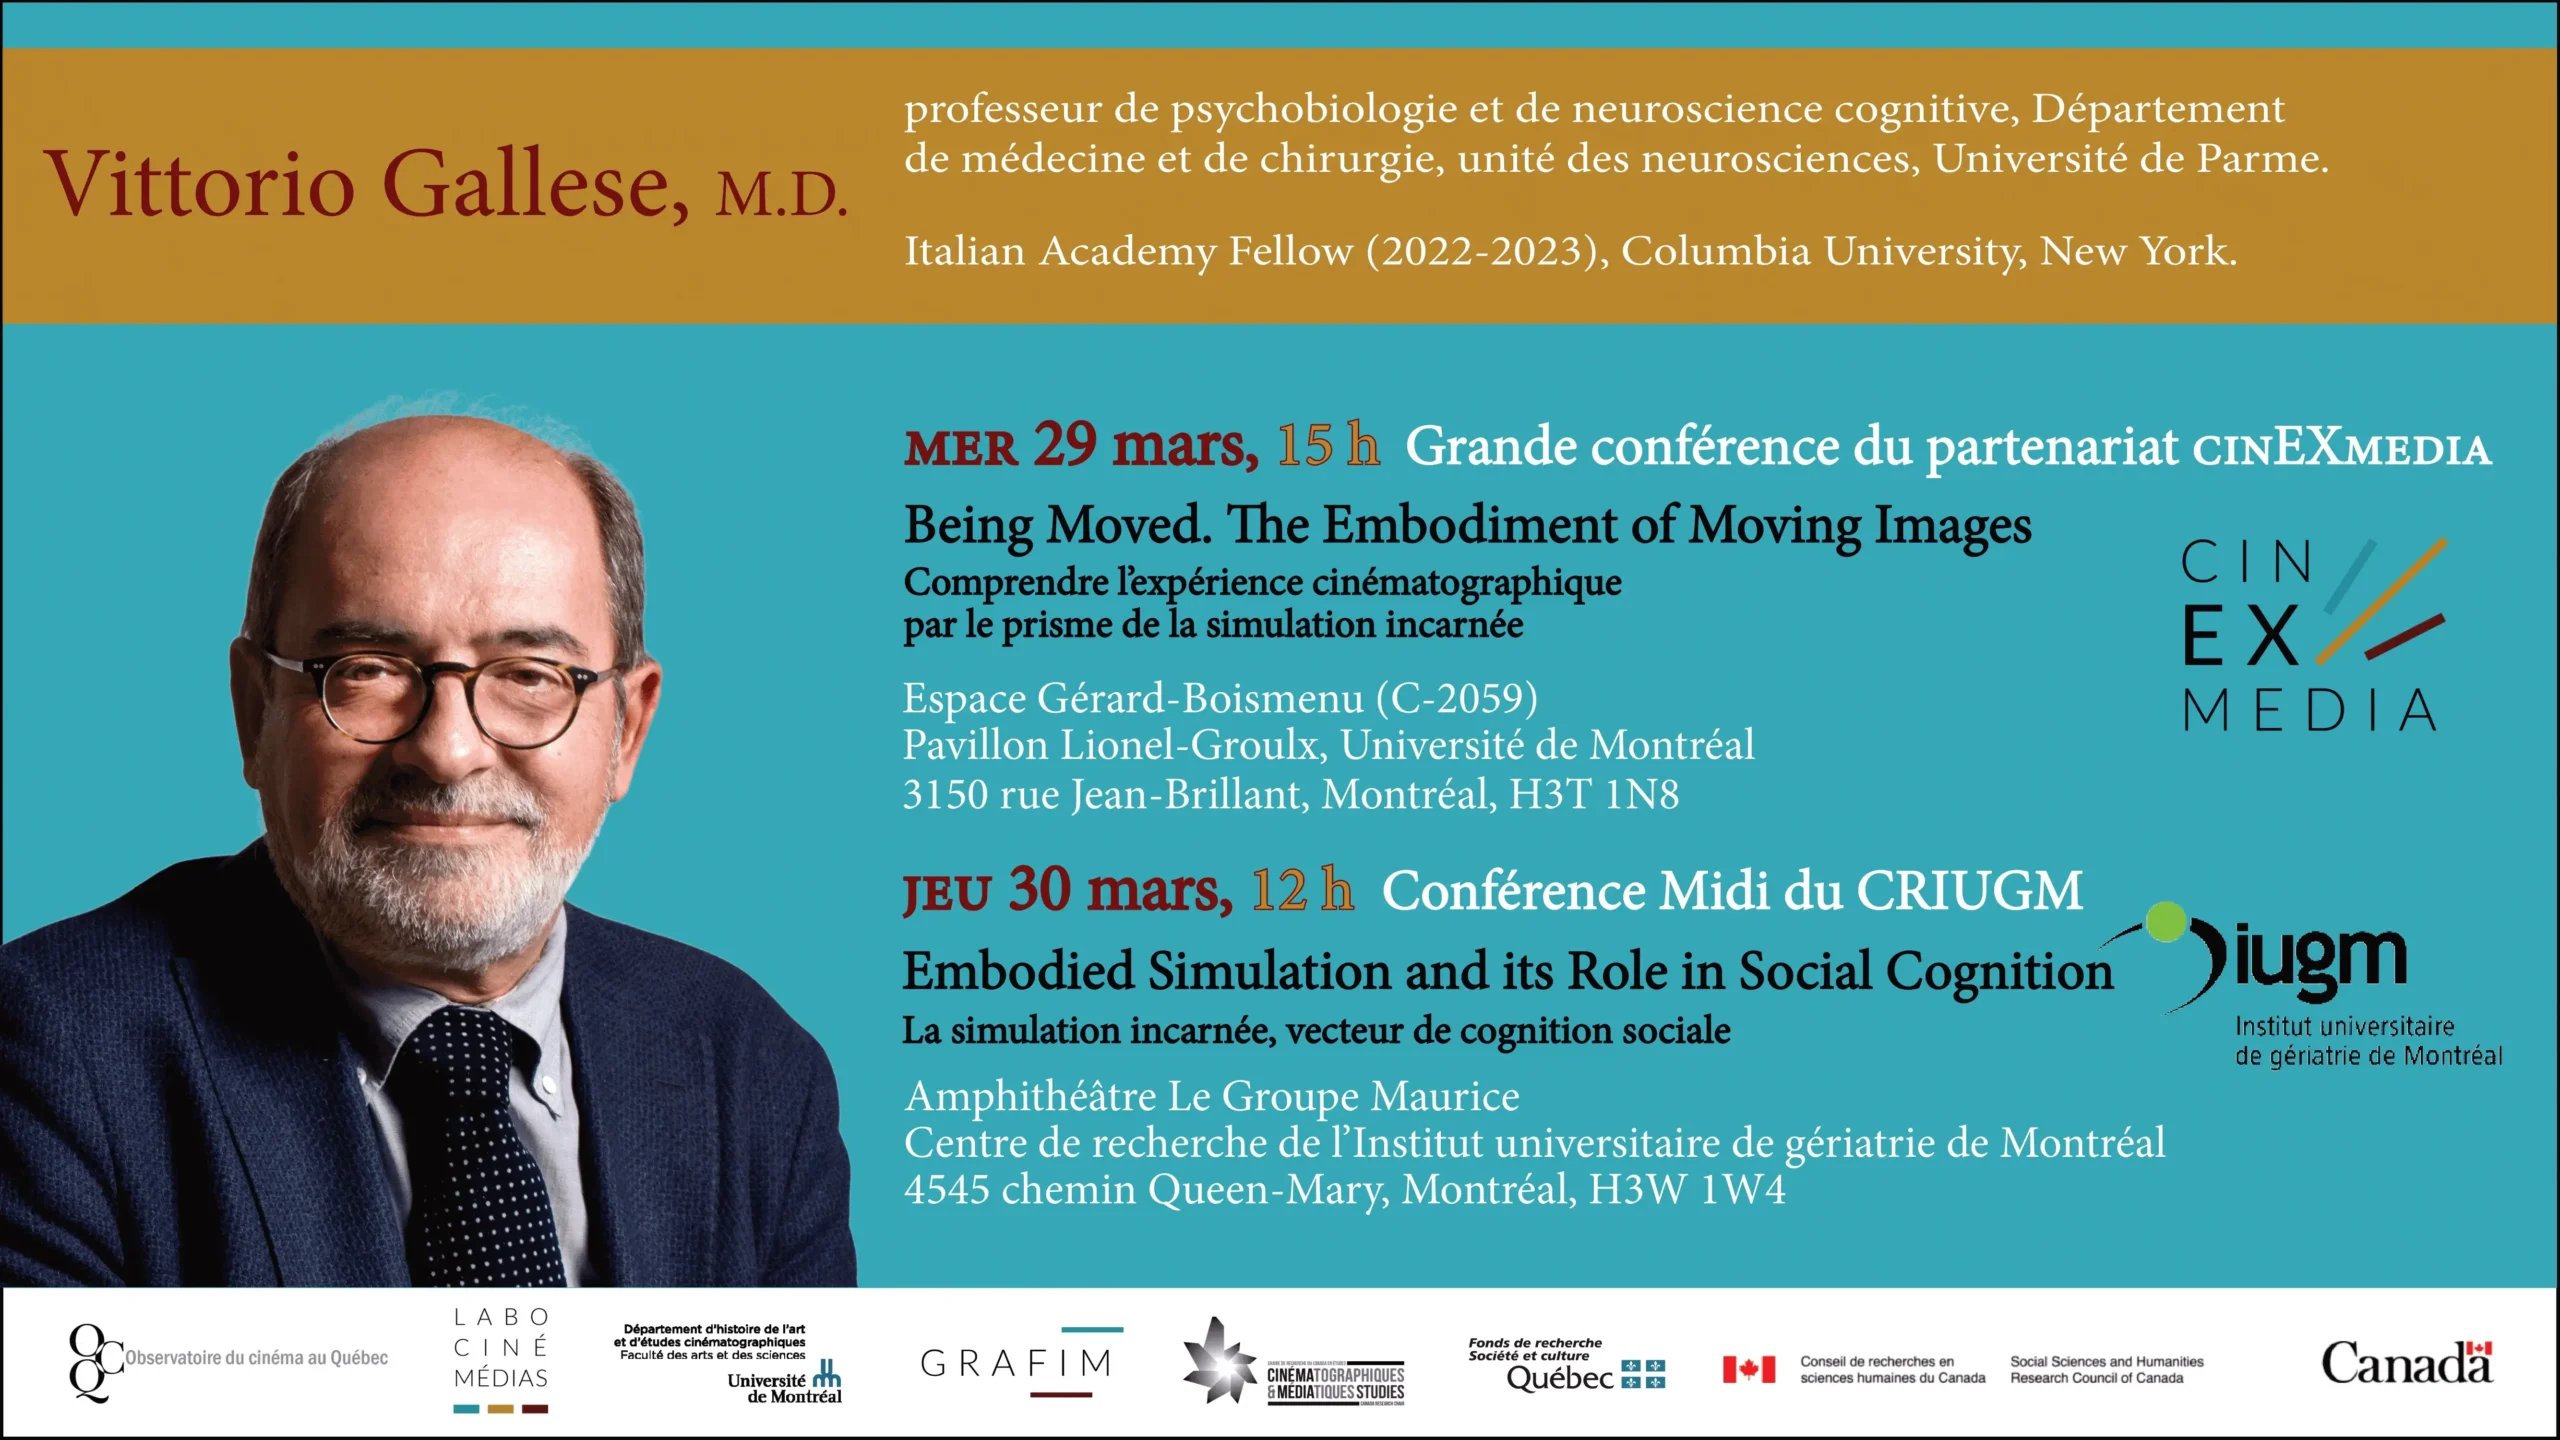 You are currently viewing 30/03/2023 - Conférence Midi du CRIUGM en partenariat avec cinEXmedia (english only) - Vittorio Gallese: Embodied Simulation and its Role in Social Cognition